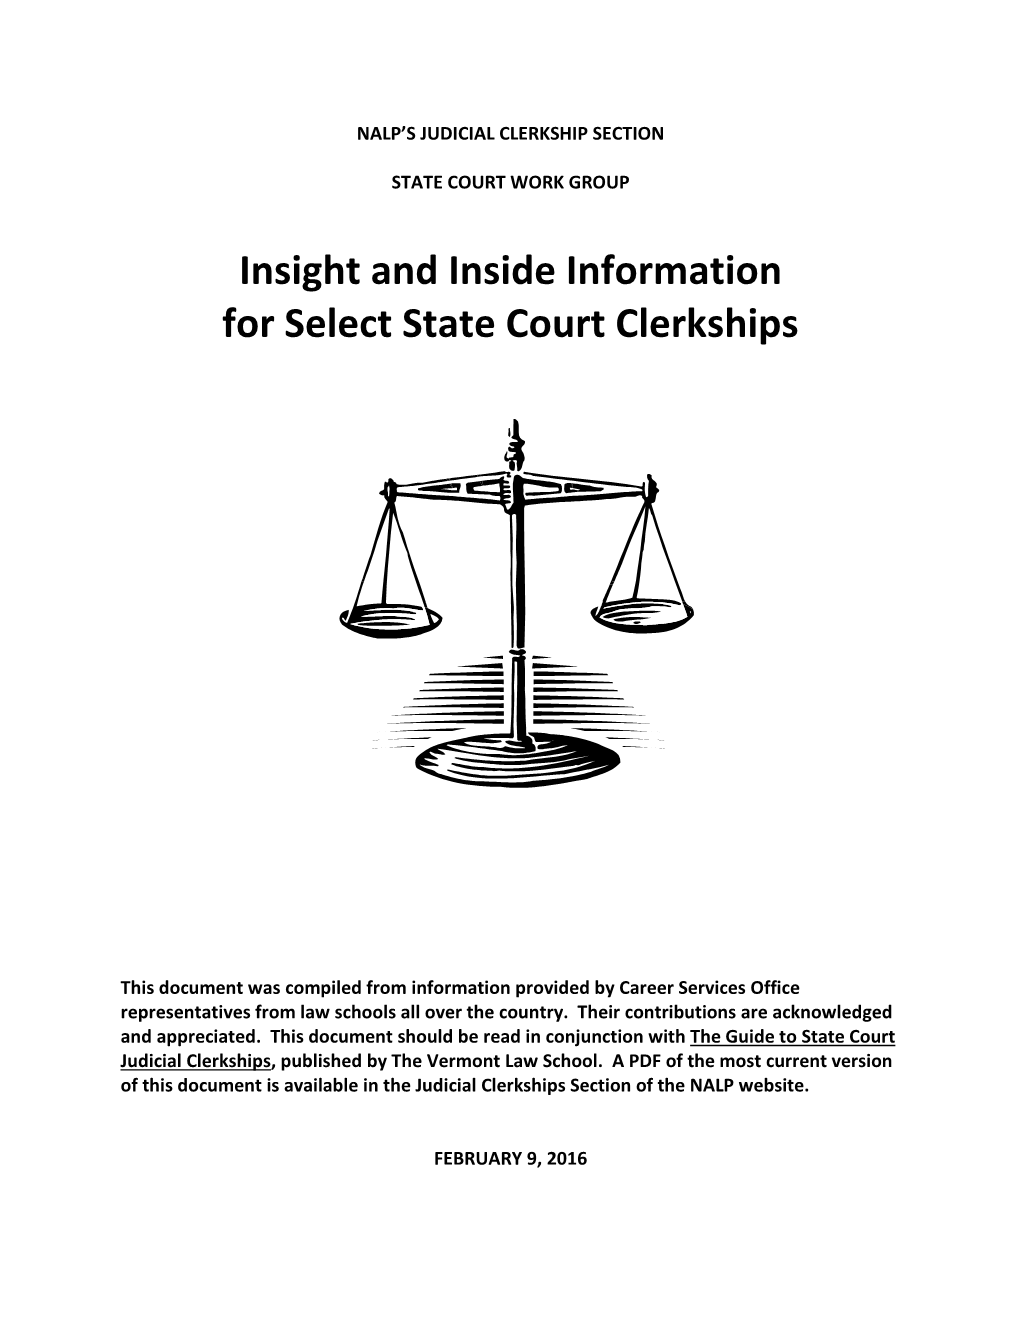 Insight and Inside Information for Select State Court Clerkships